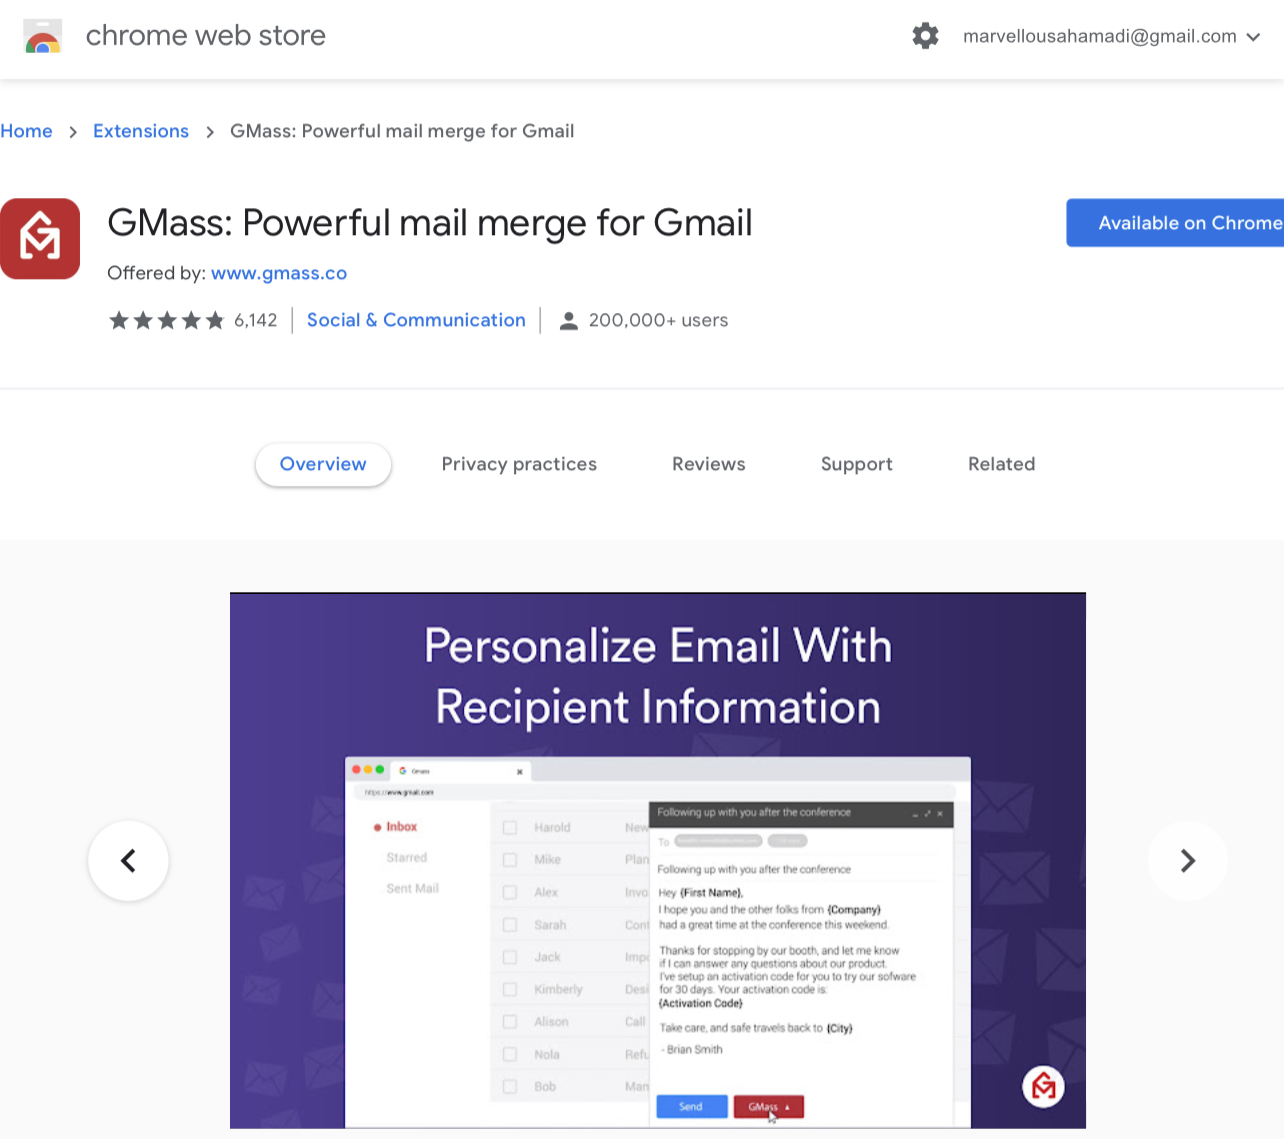 Screenshot of the GMass email marketing extension for Gmail available in the Google Chrome web store